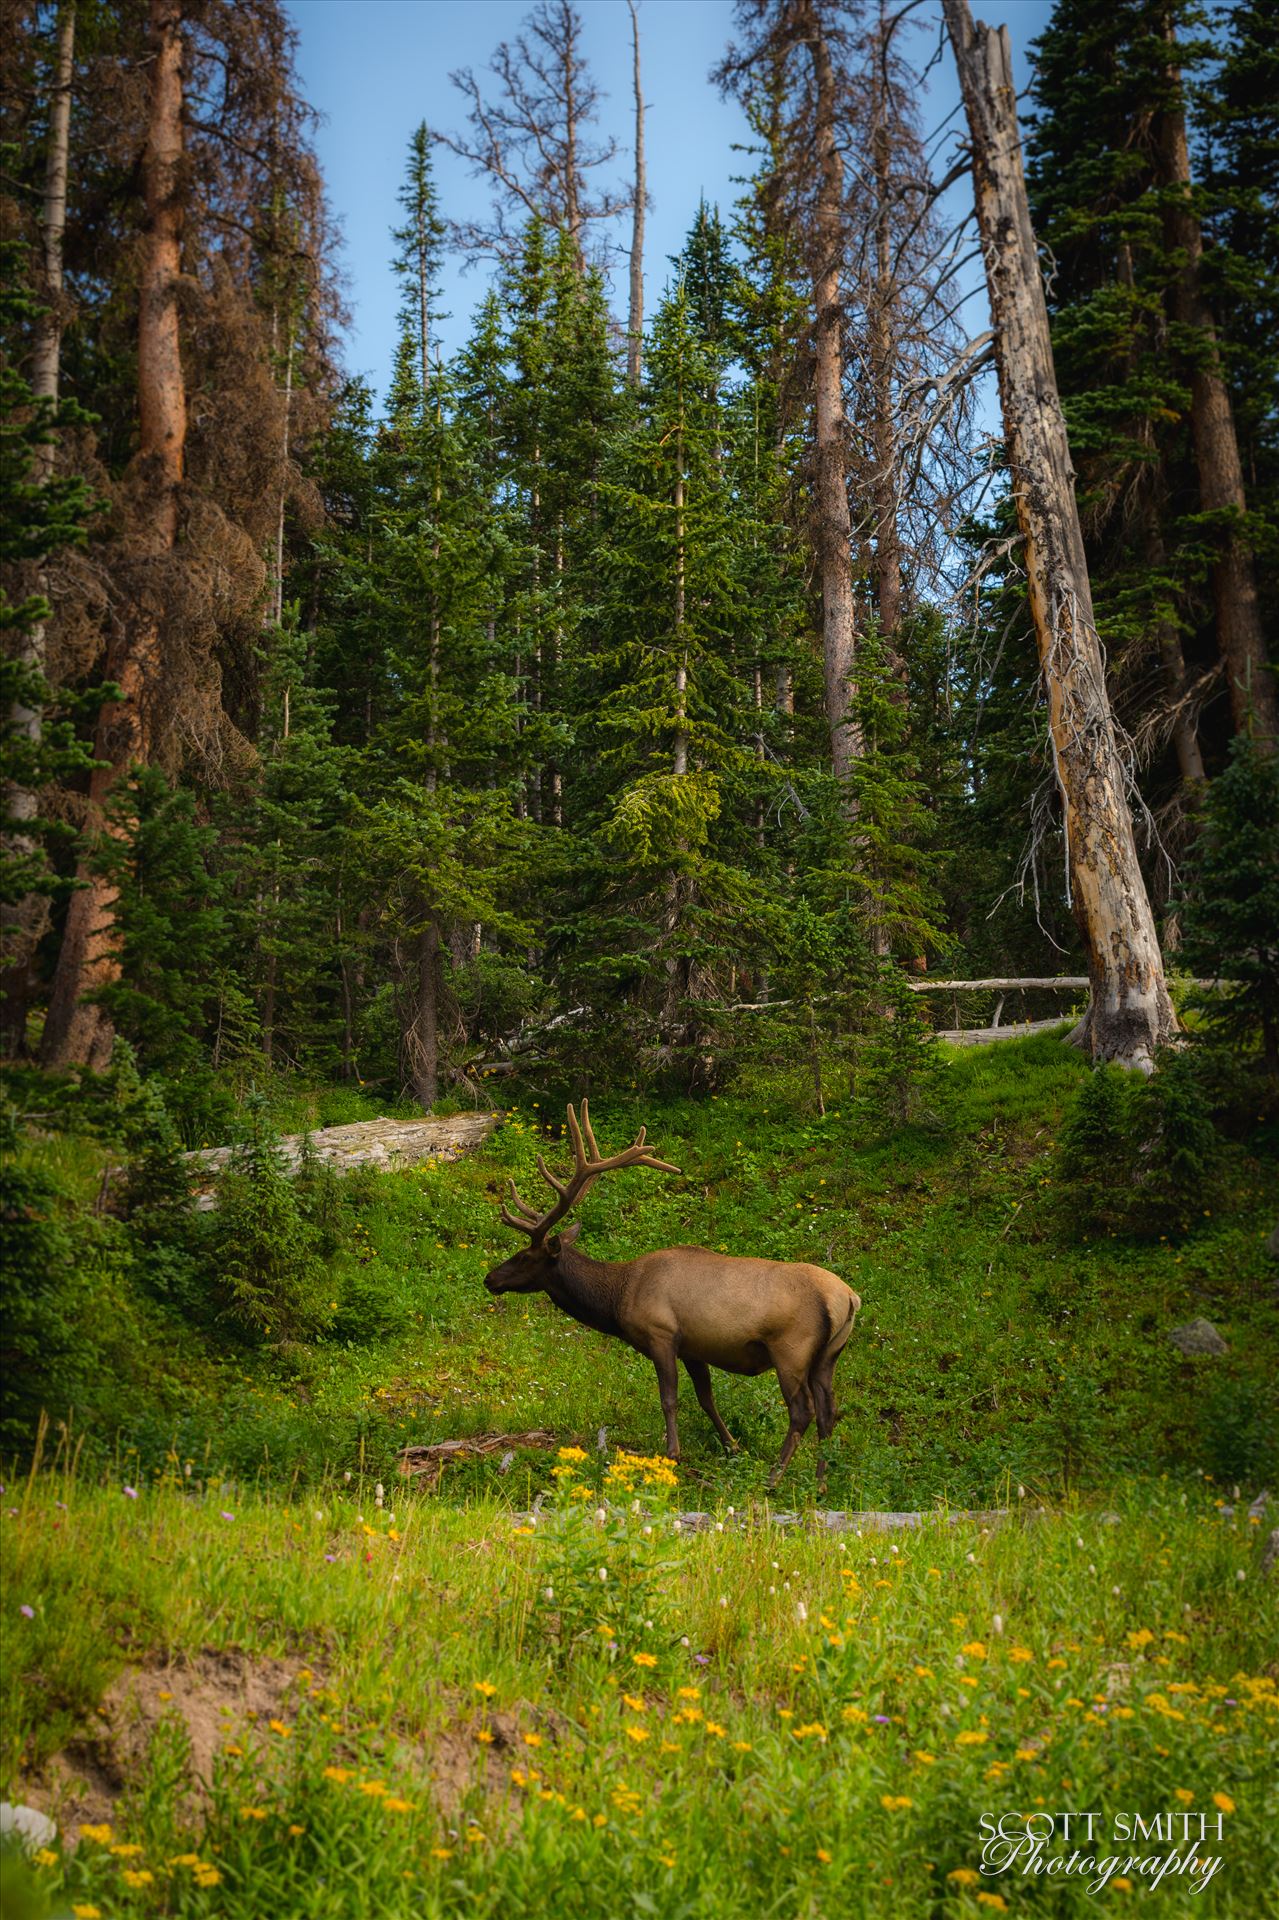 Elk in the Wild - A fairytale setting in Rocky Mountain National Park, just off Trail Ridge Road. A fully grown elk buck grazes on the lush growth. by Scott Smith Photos